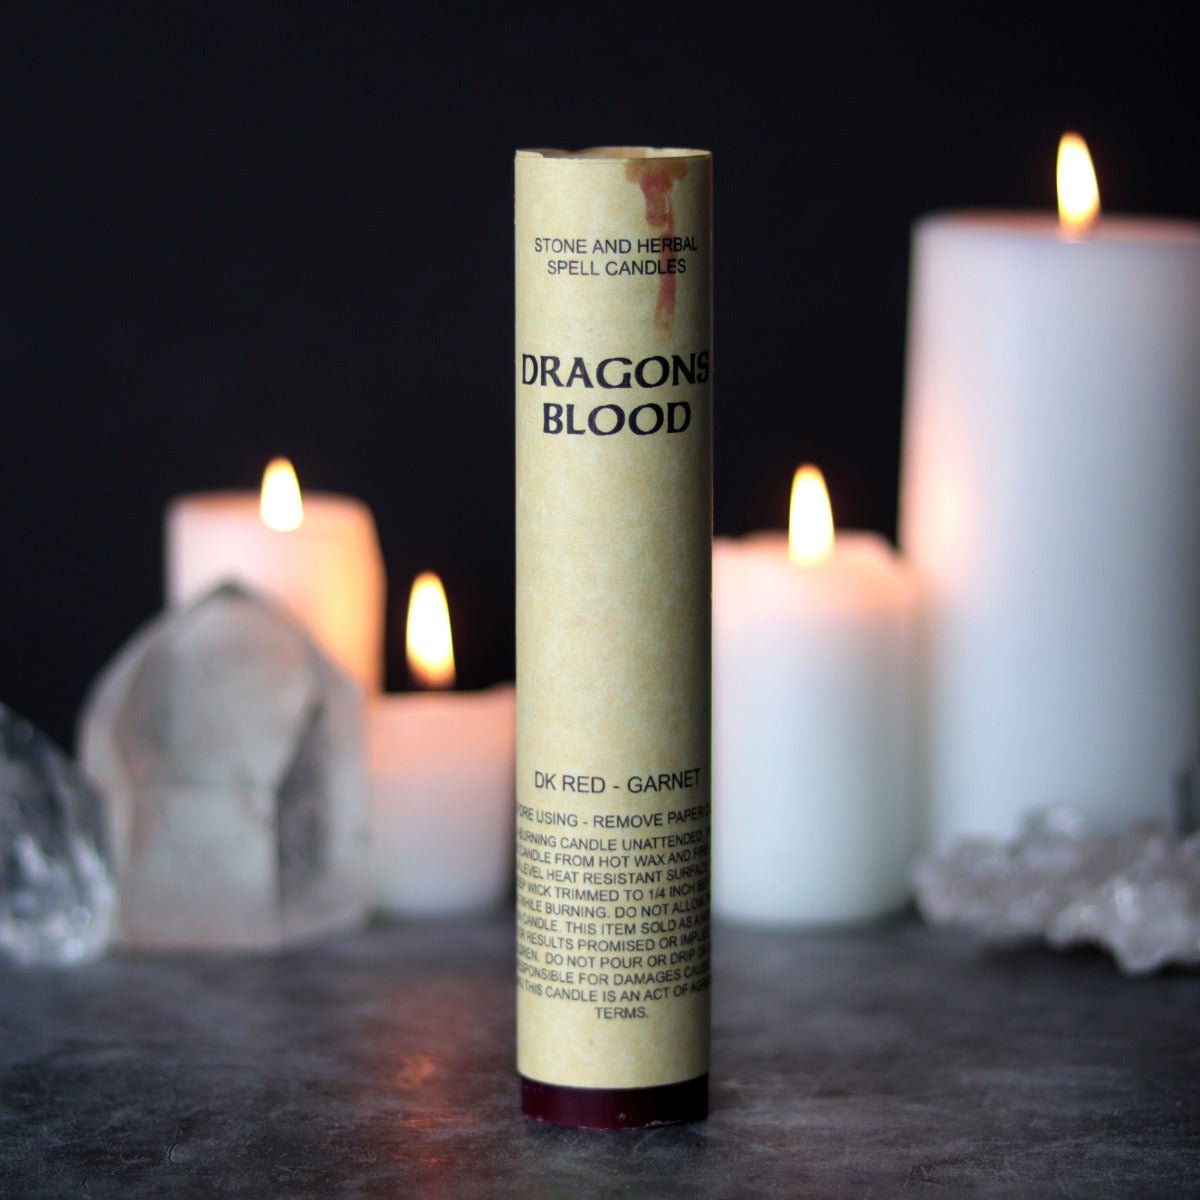 Dragons Blood Spell Candle - 13 Moons